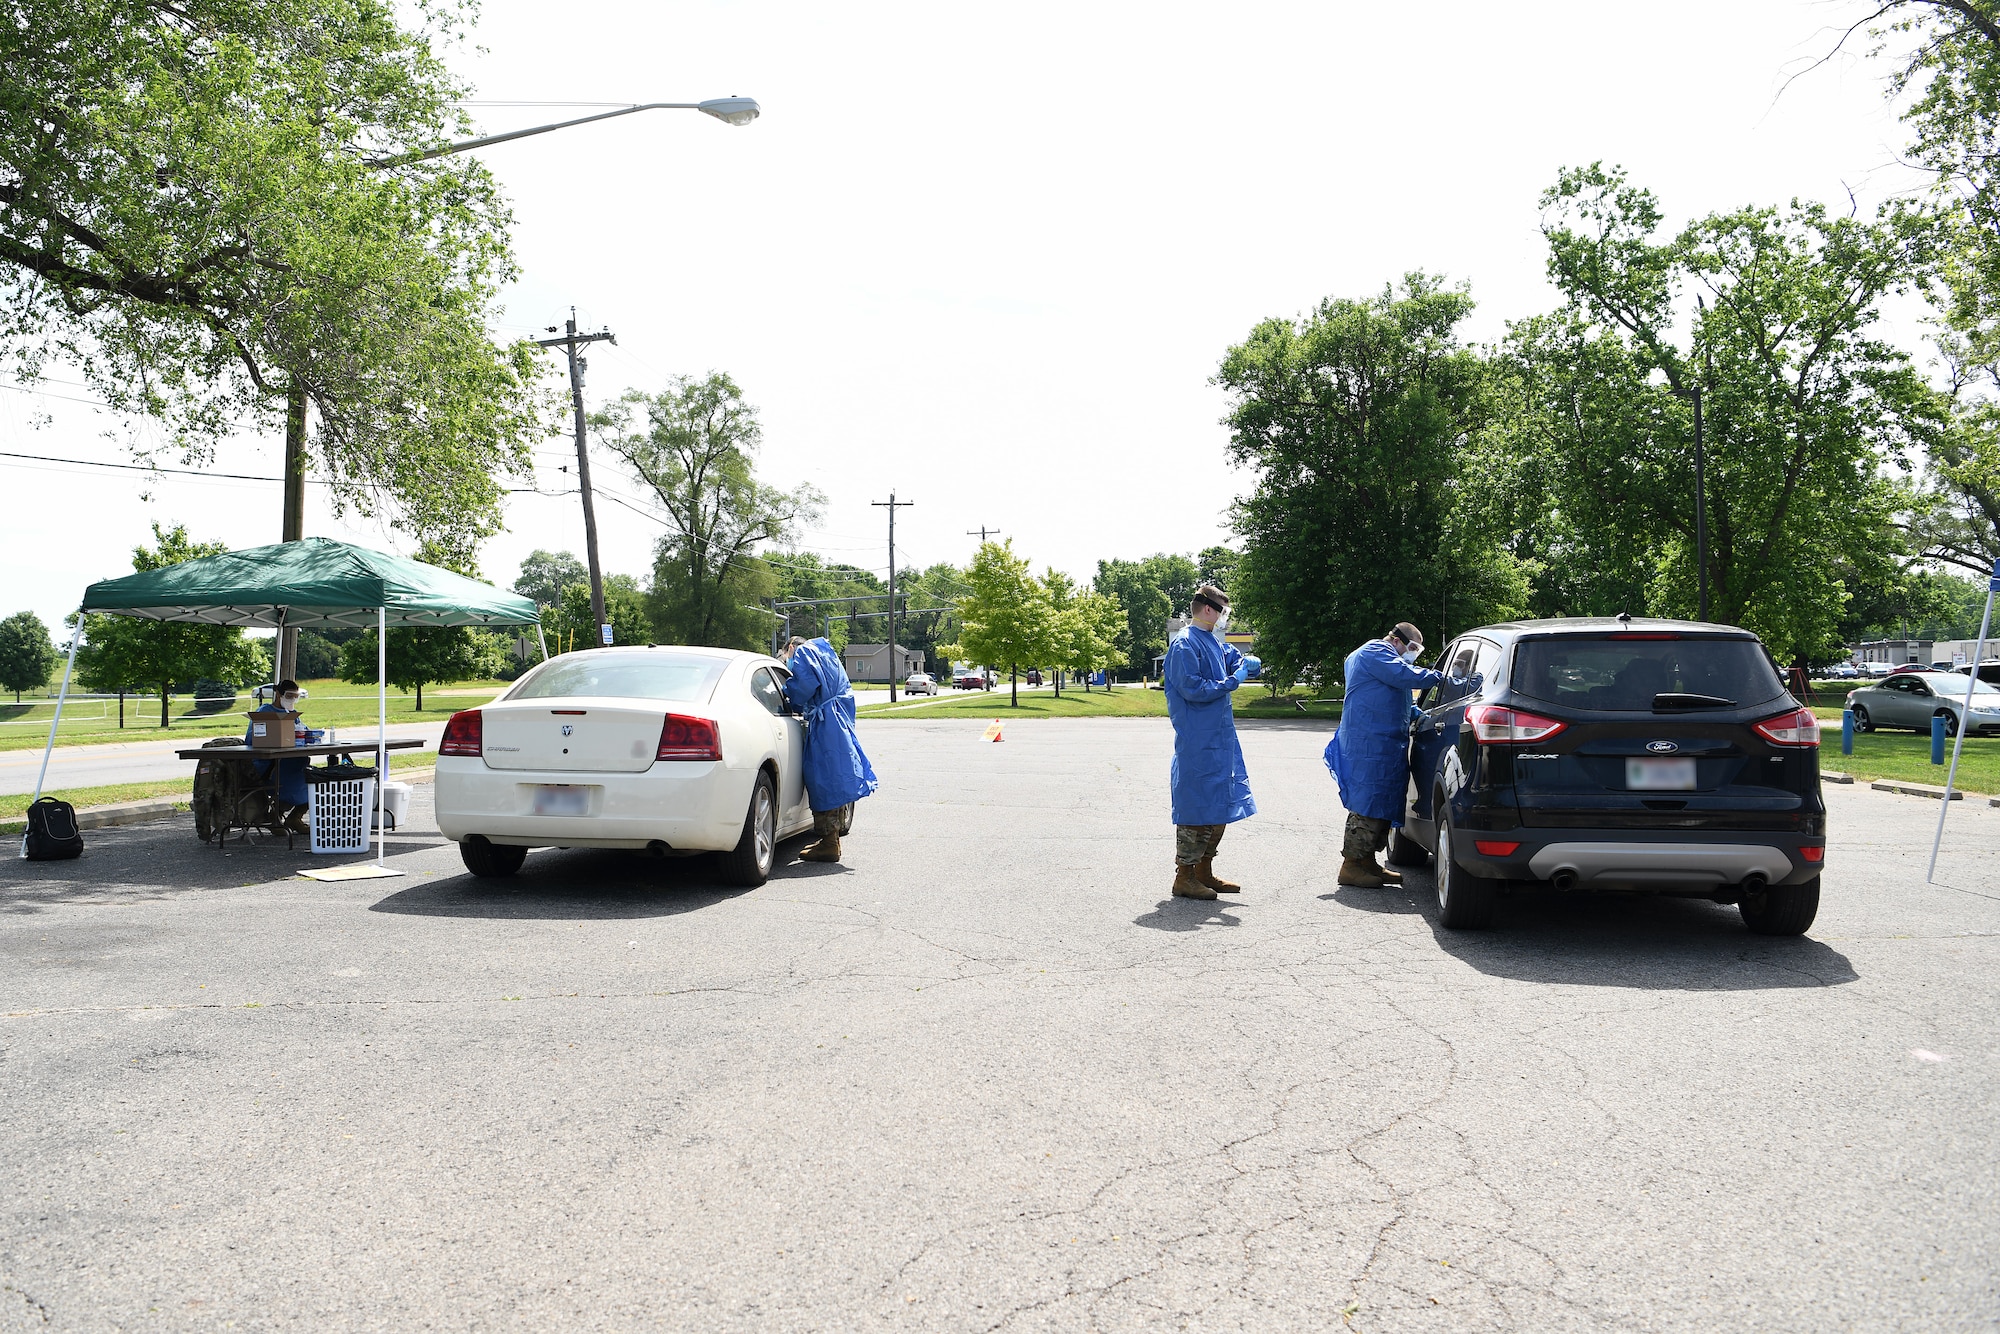 Local community members receive COVID-19 testing June 17, 2020 at Community Building Institute in Middletown, Ohio. Airmen from the 178th Wing and Soldiers assigned to the Ohio National Guard augmented staff members of Centerpoint Health to help with drive-thru Coronavirus testing of local community members. (U.S. Air National Guard photo by Staff Sgt. Amber Mullen)